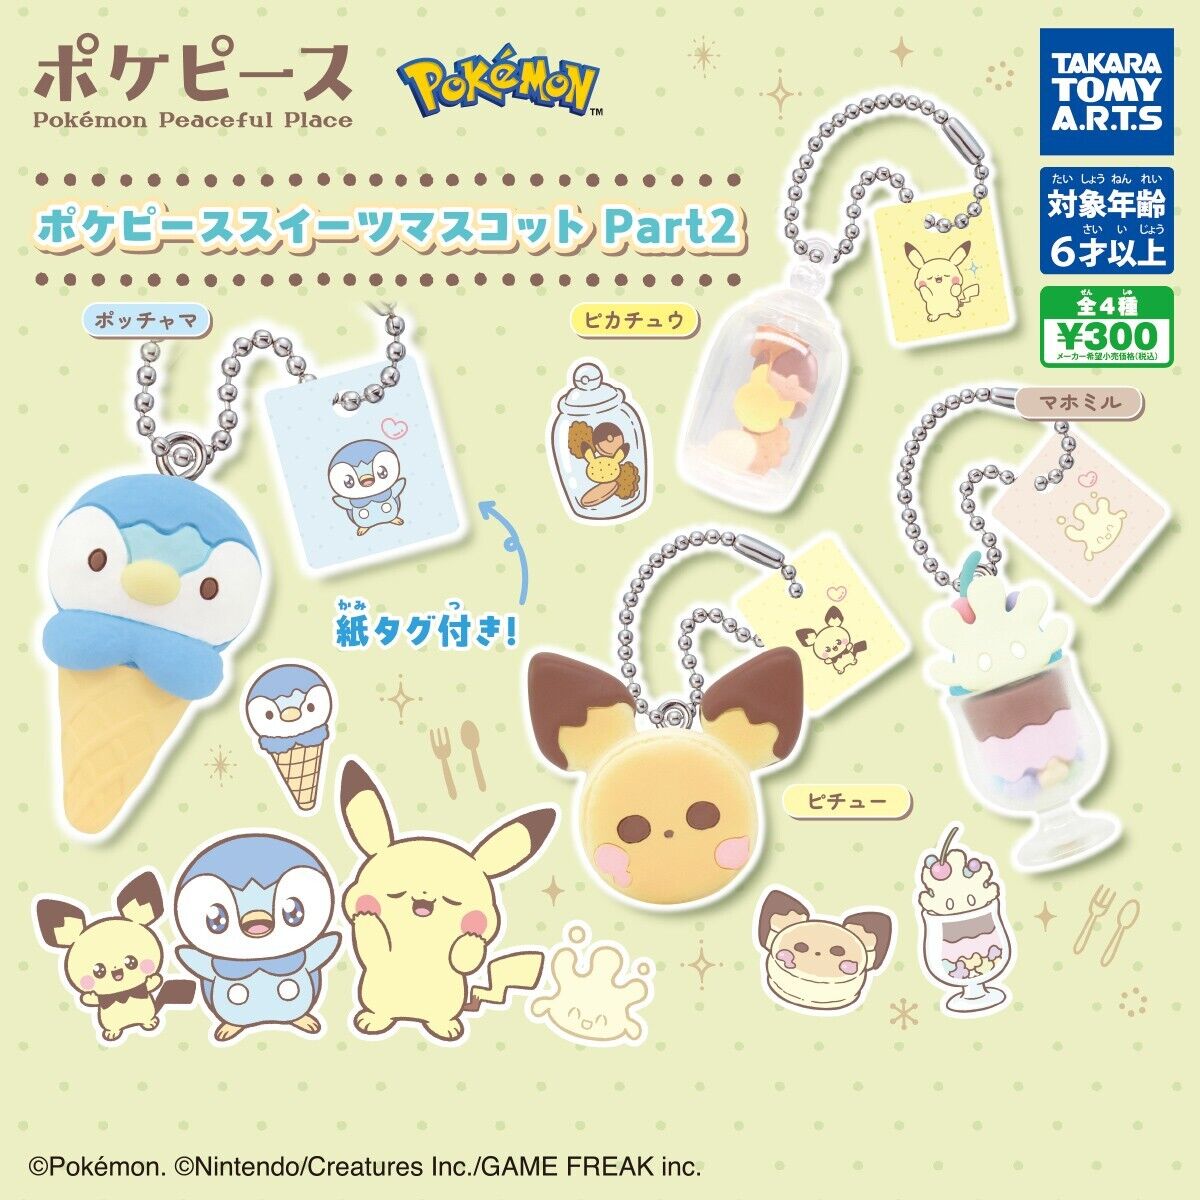 Pokemon Peaceful Place PokePeace Piece Sweets Mascot v2 Complete Set Capsule Toy